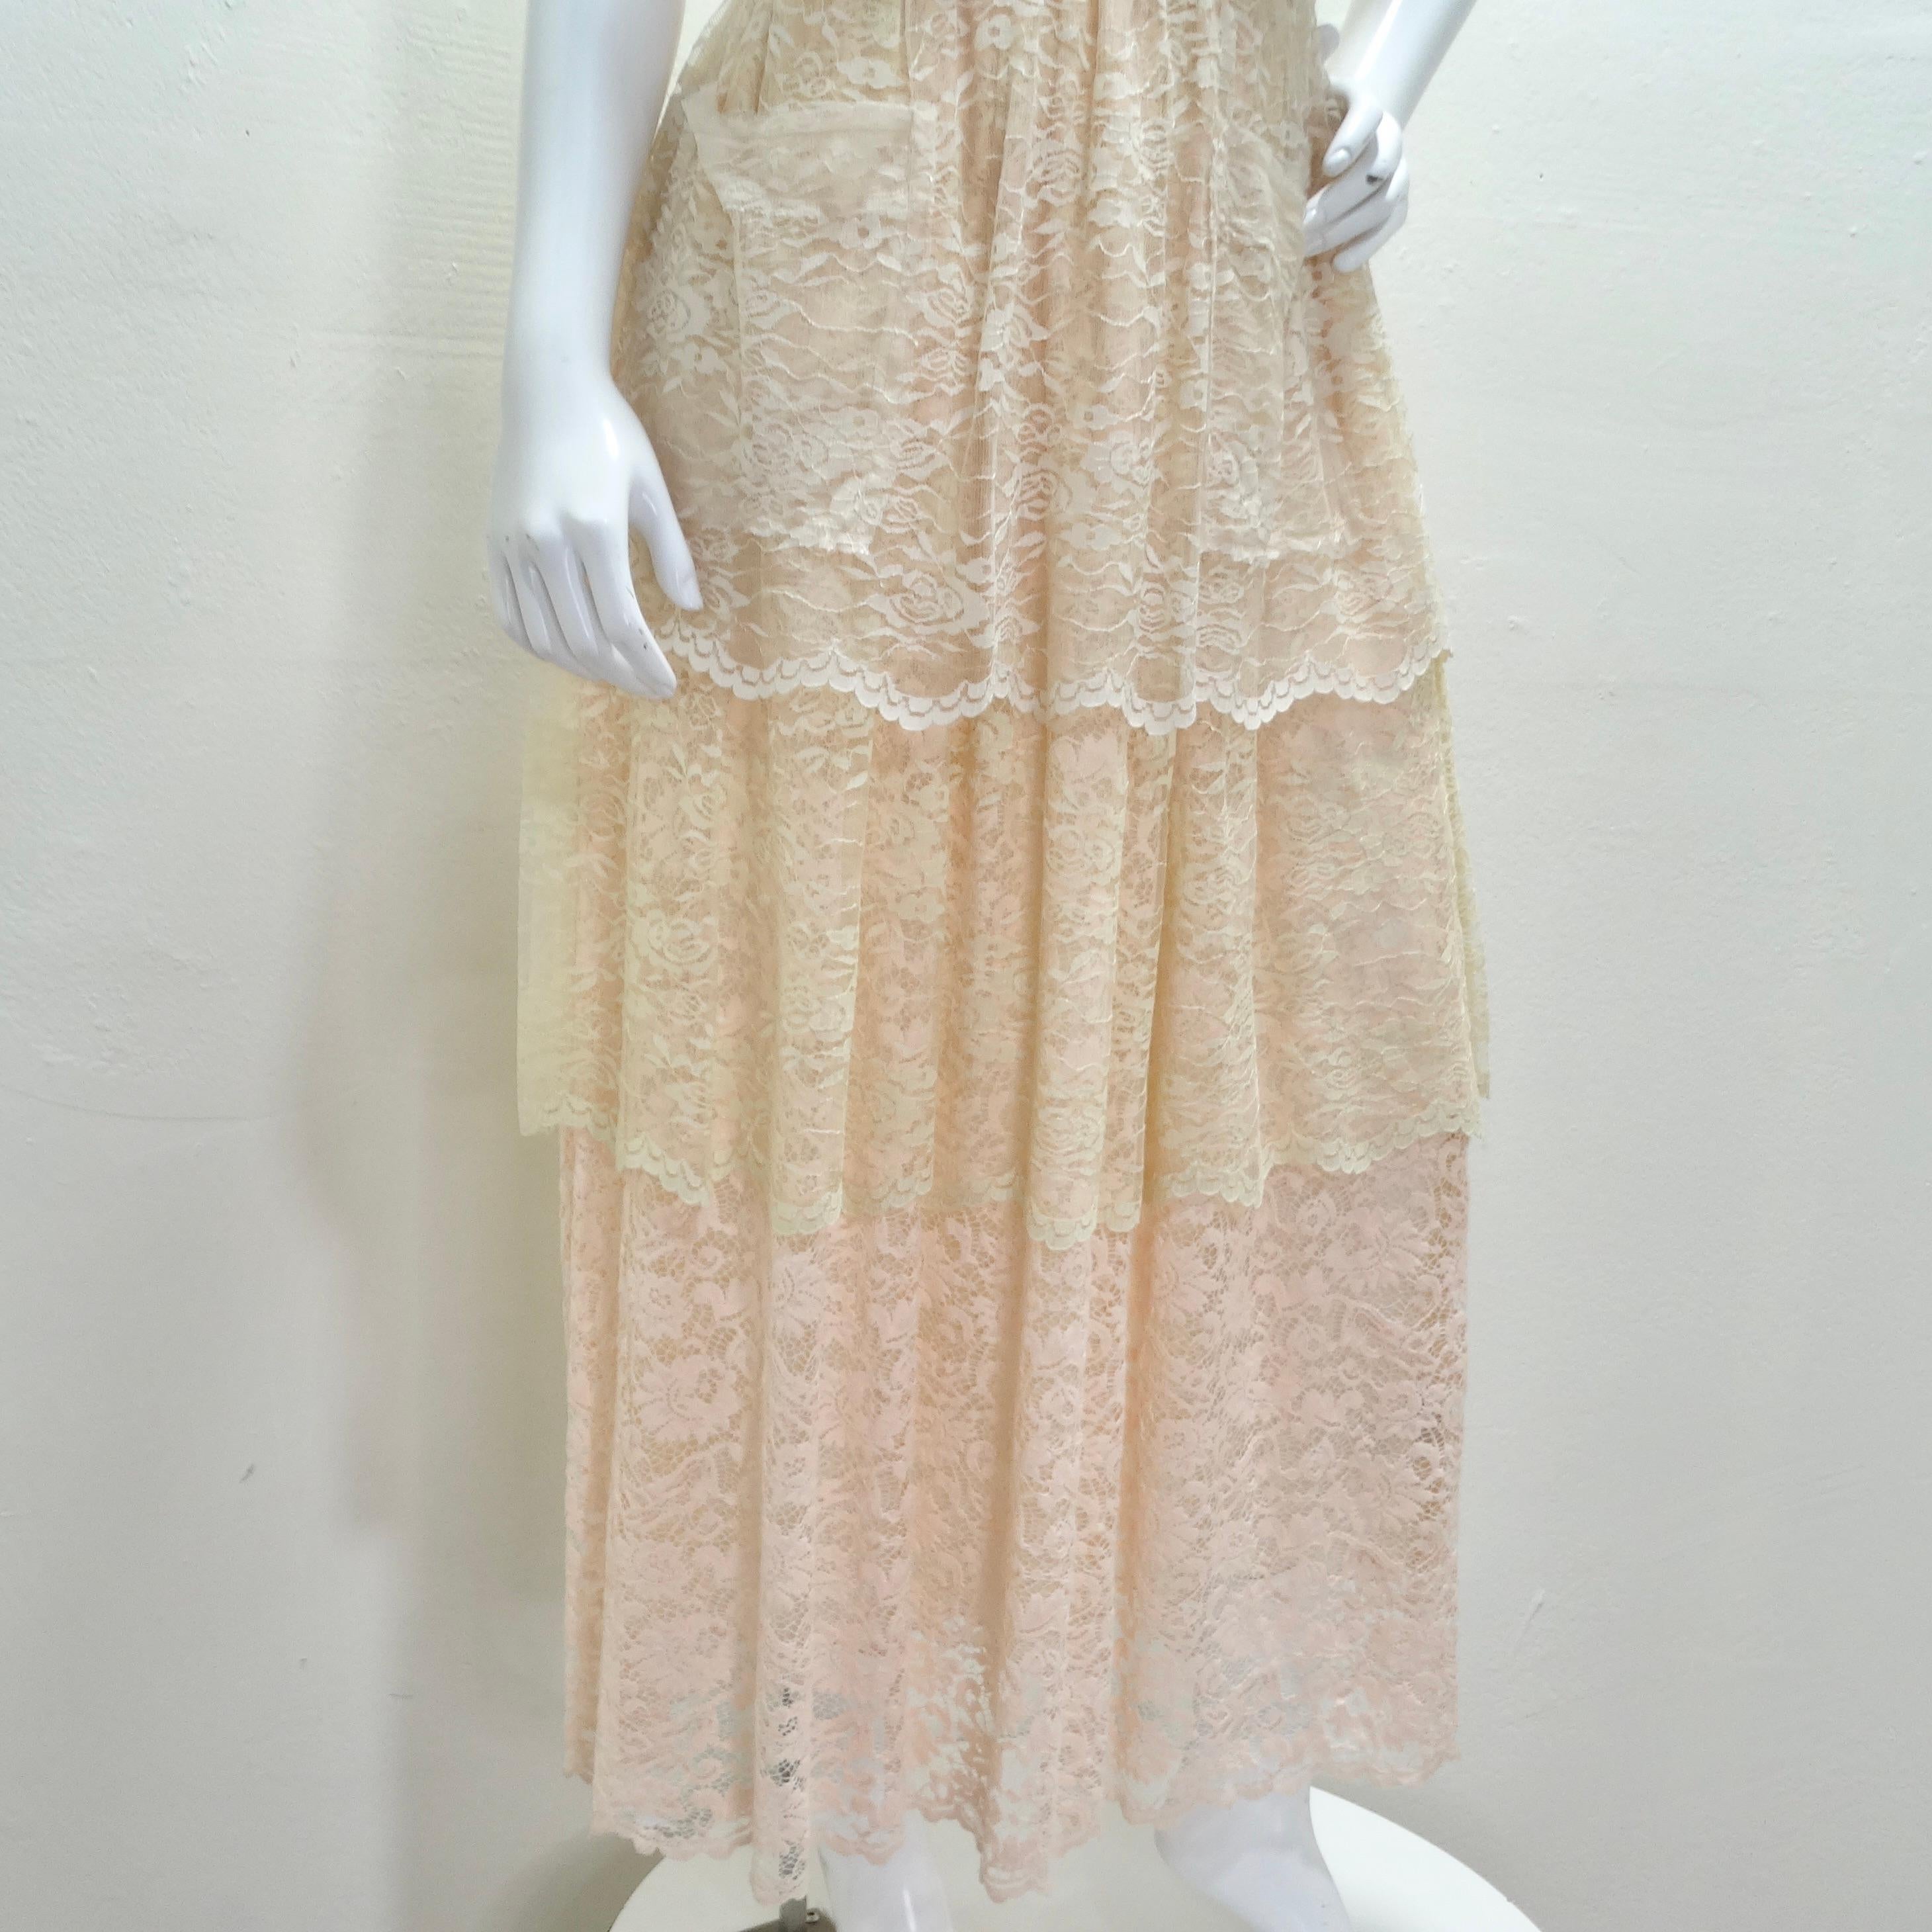 Dolce & Gabbana Baby Pink Lace Dress In Good Condition For Sale In Scottsdale, AZ